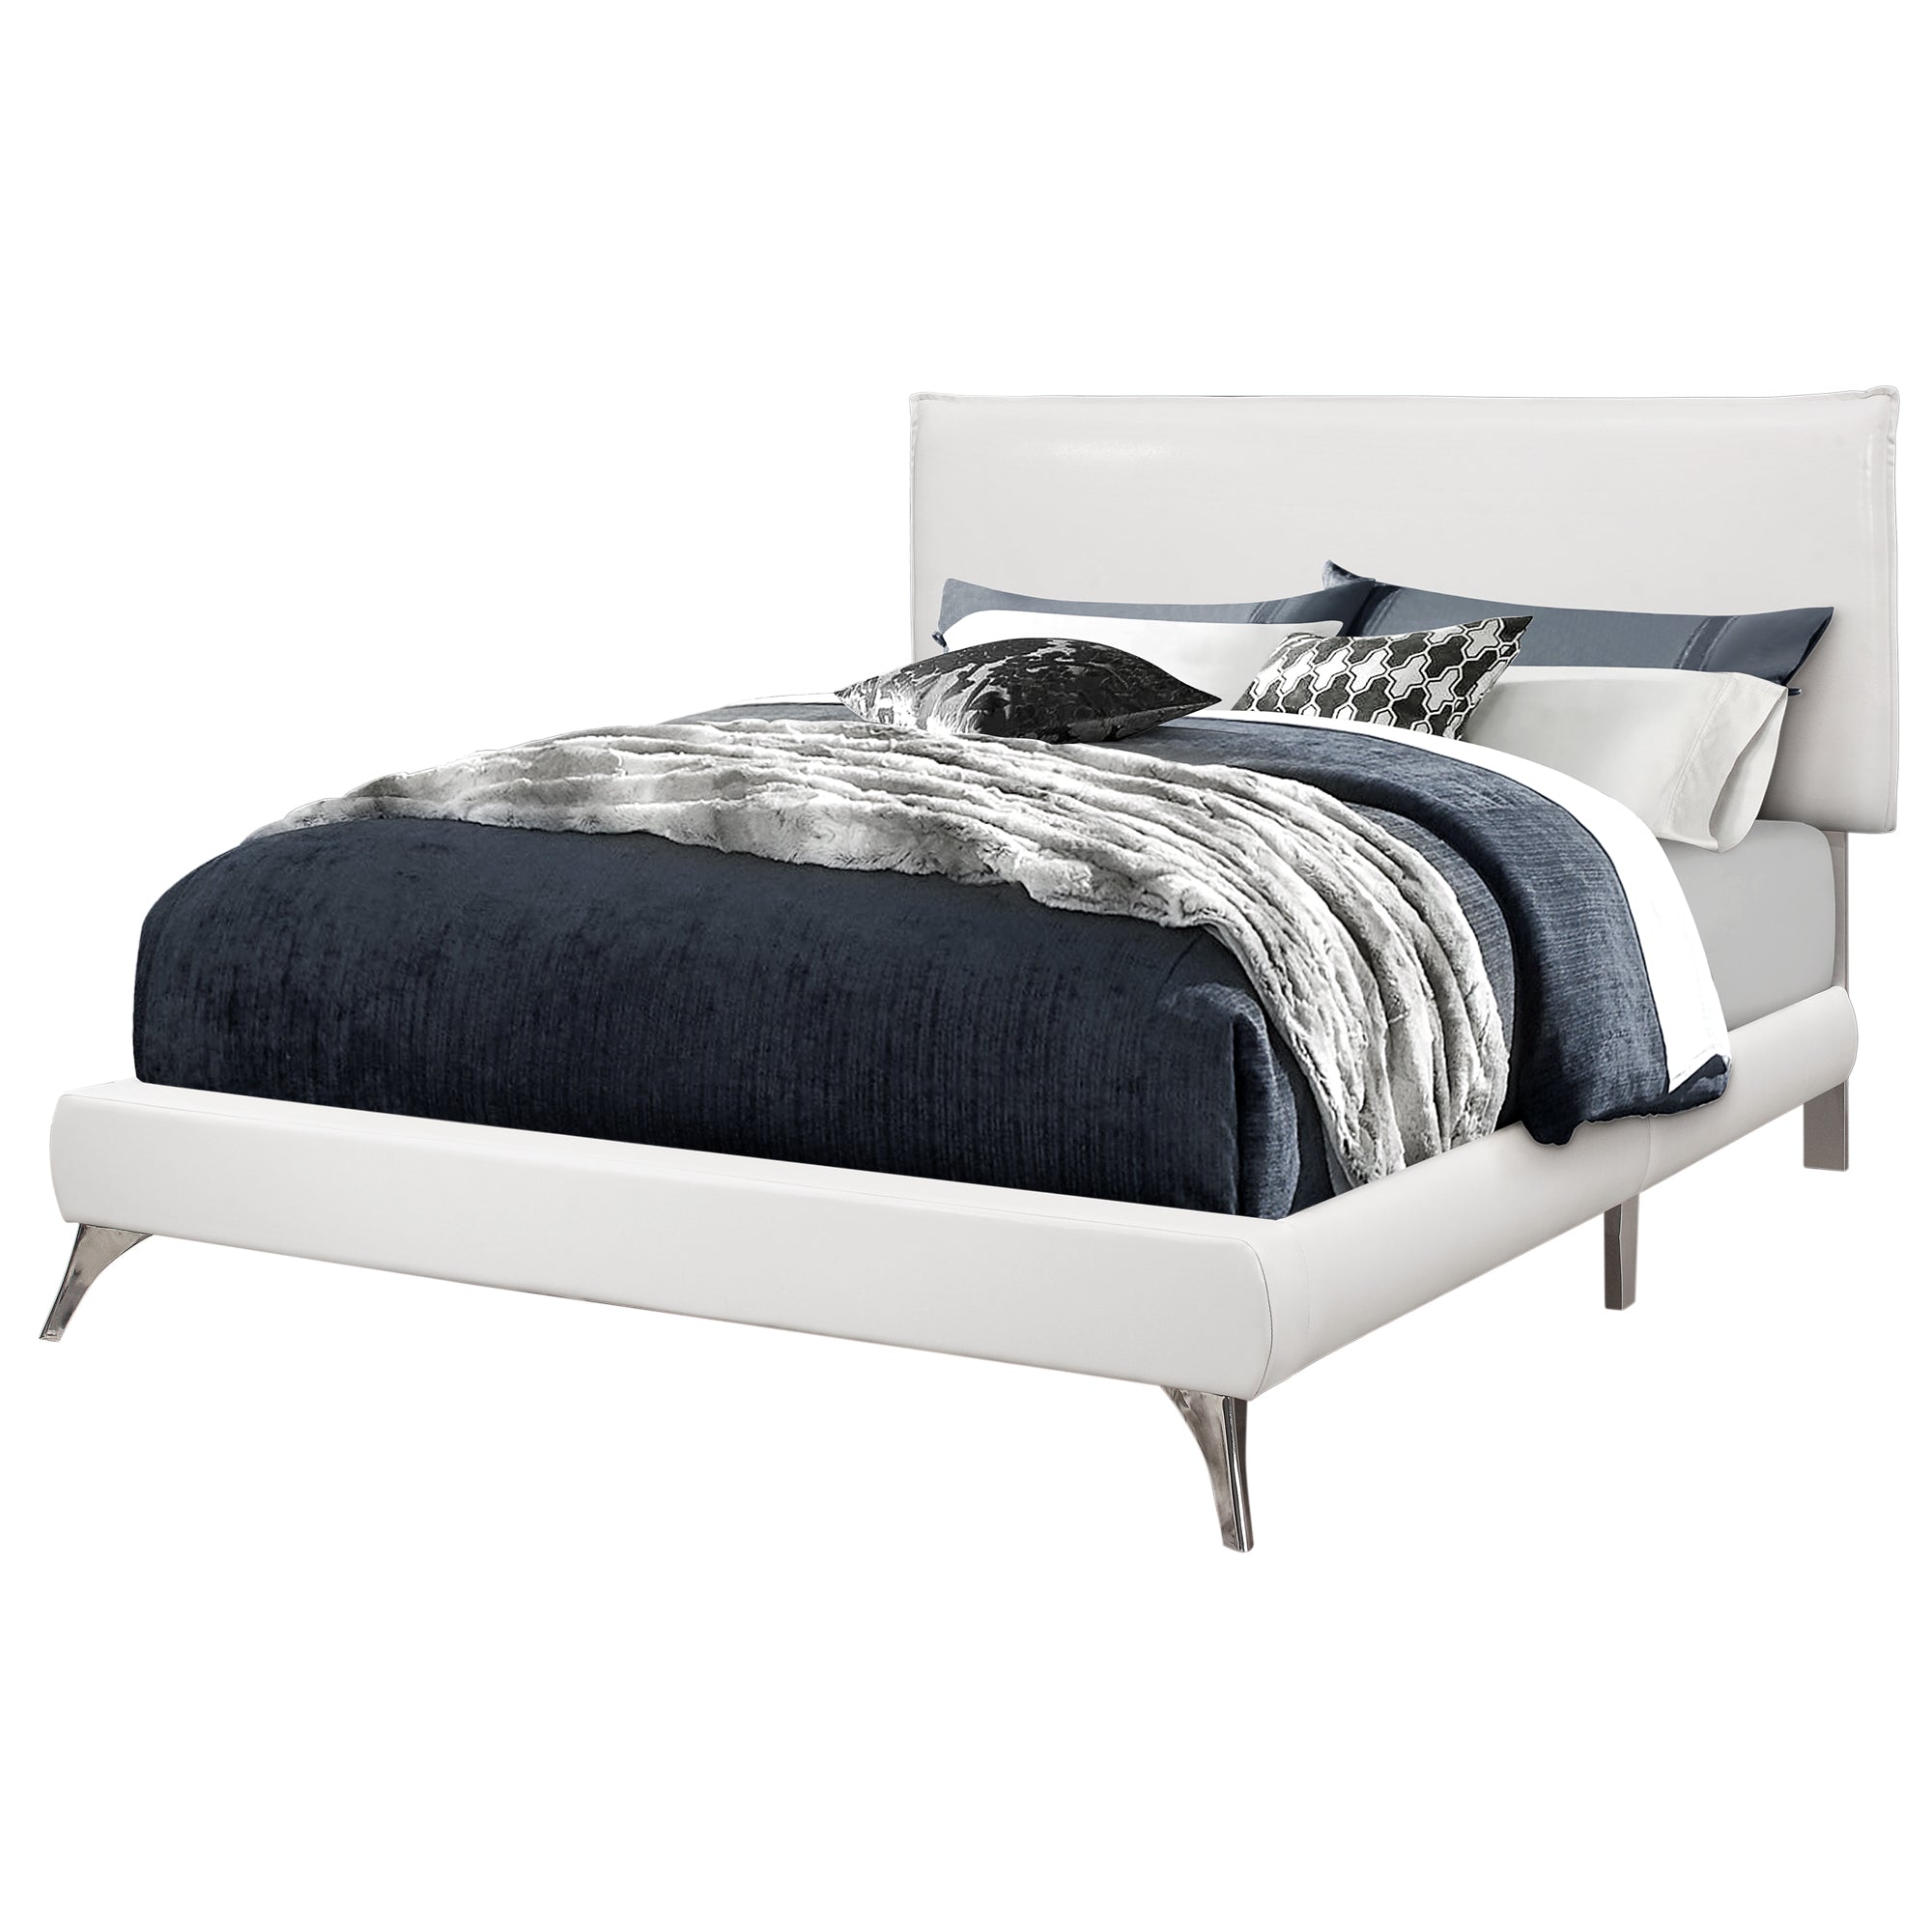 BED - QUEEN SIZE / GREY LINEN WITH CHROME LEGS